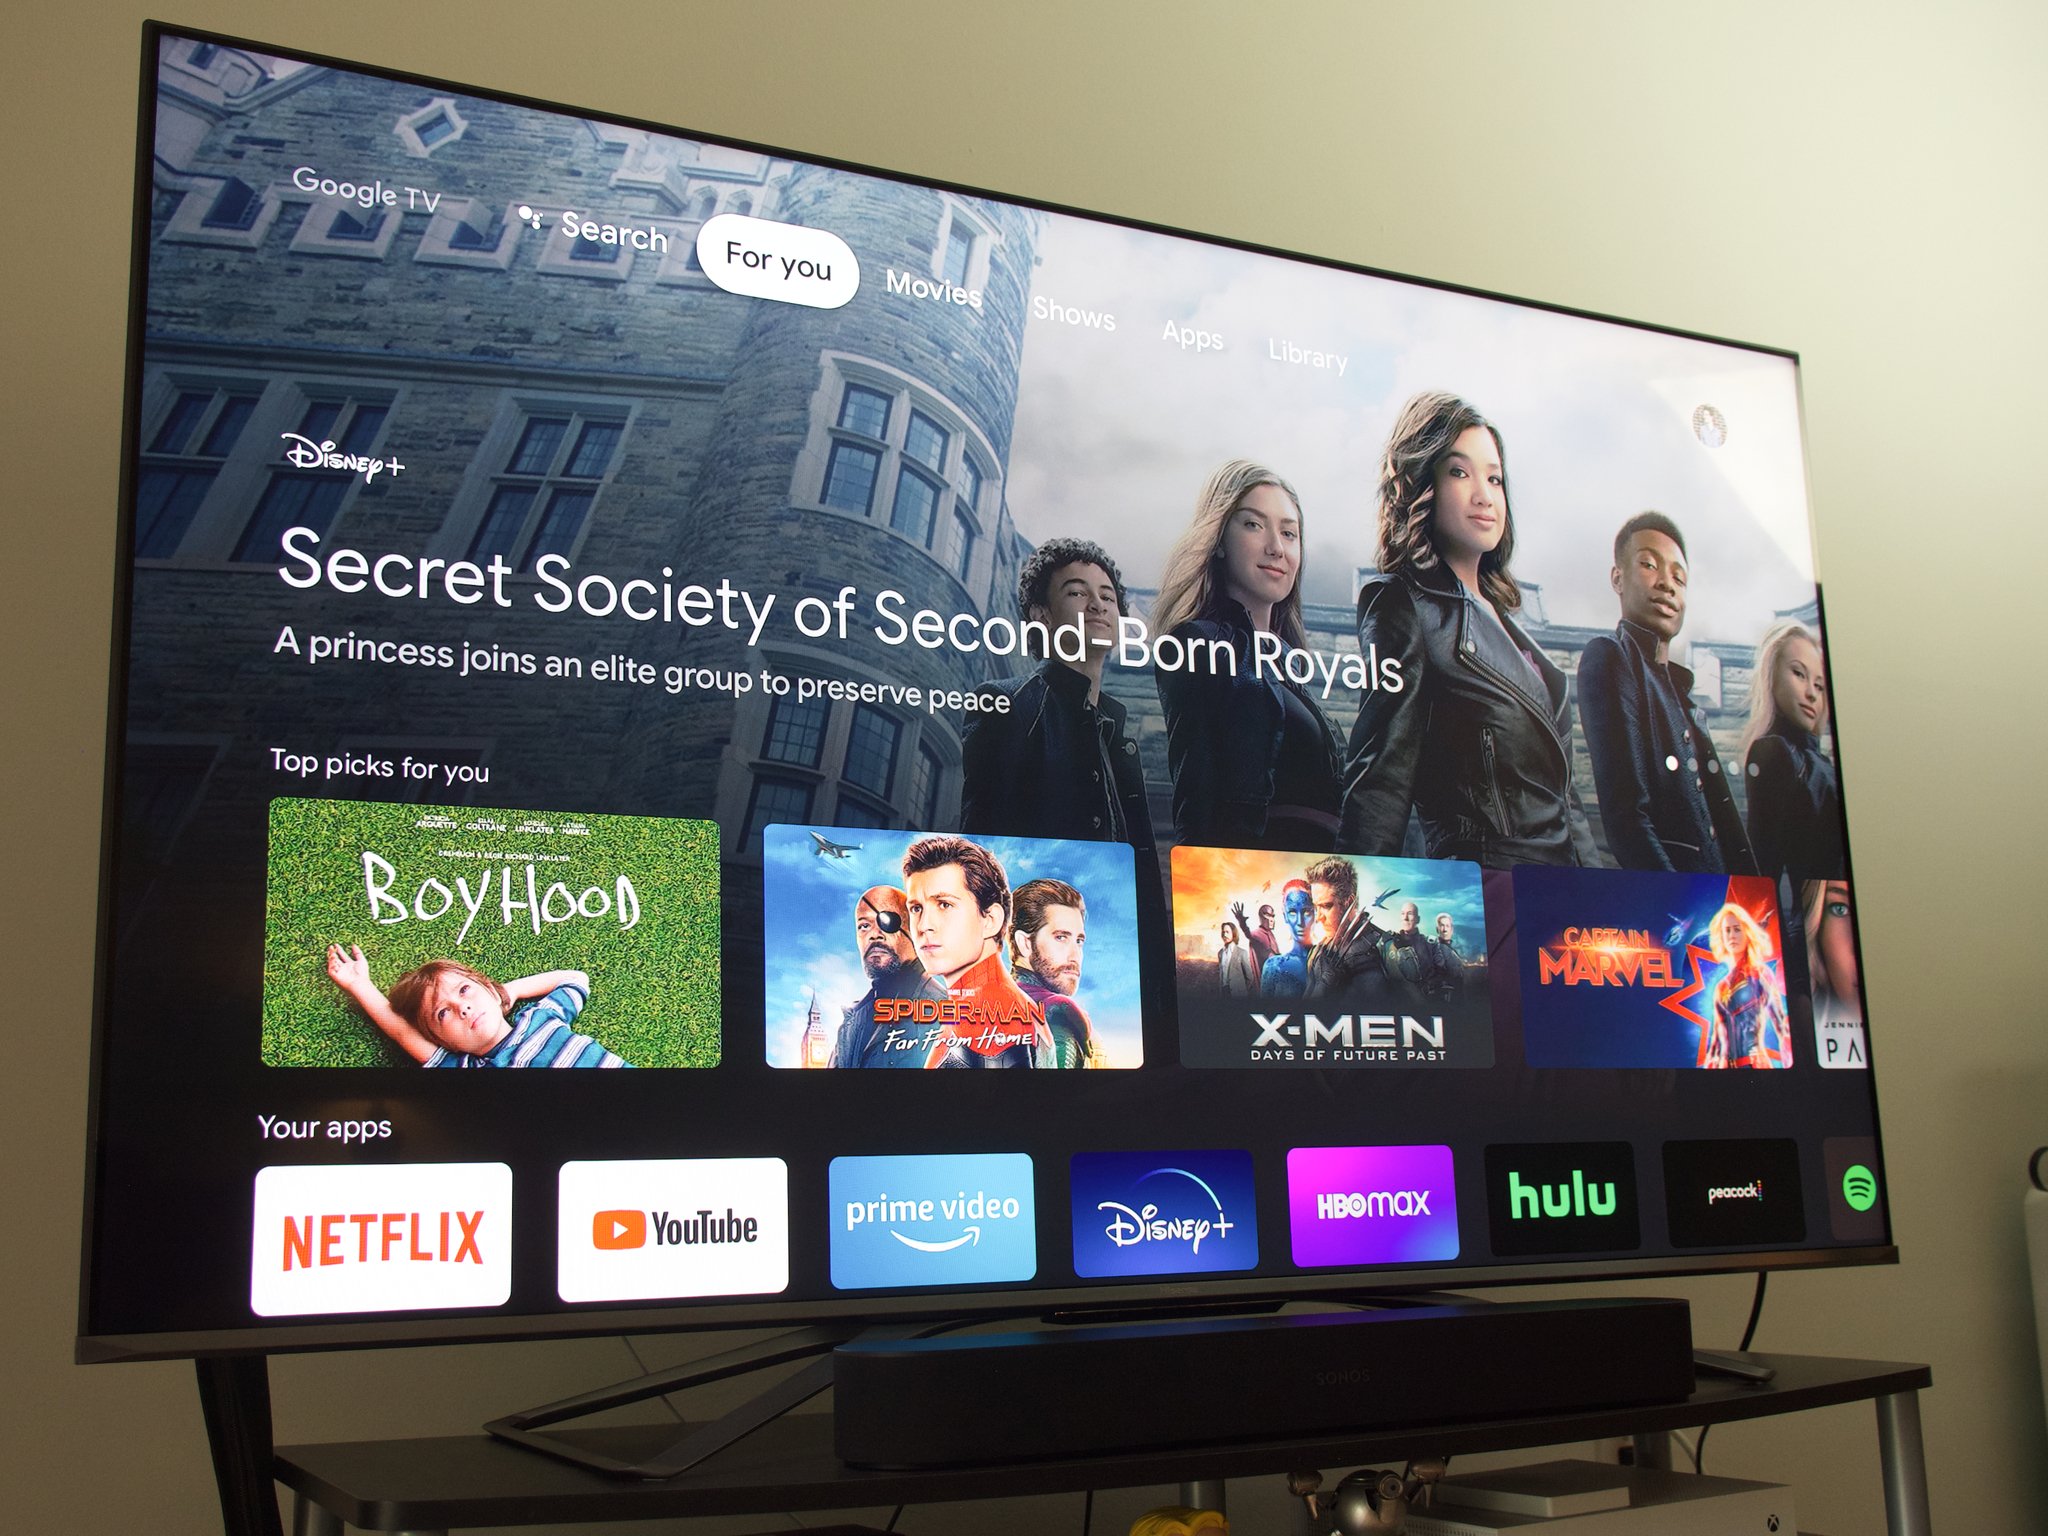 These are the best 4K TVs for your Chromecast with Google TV or Ultra